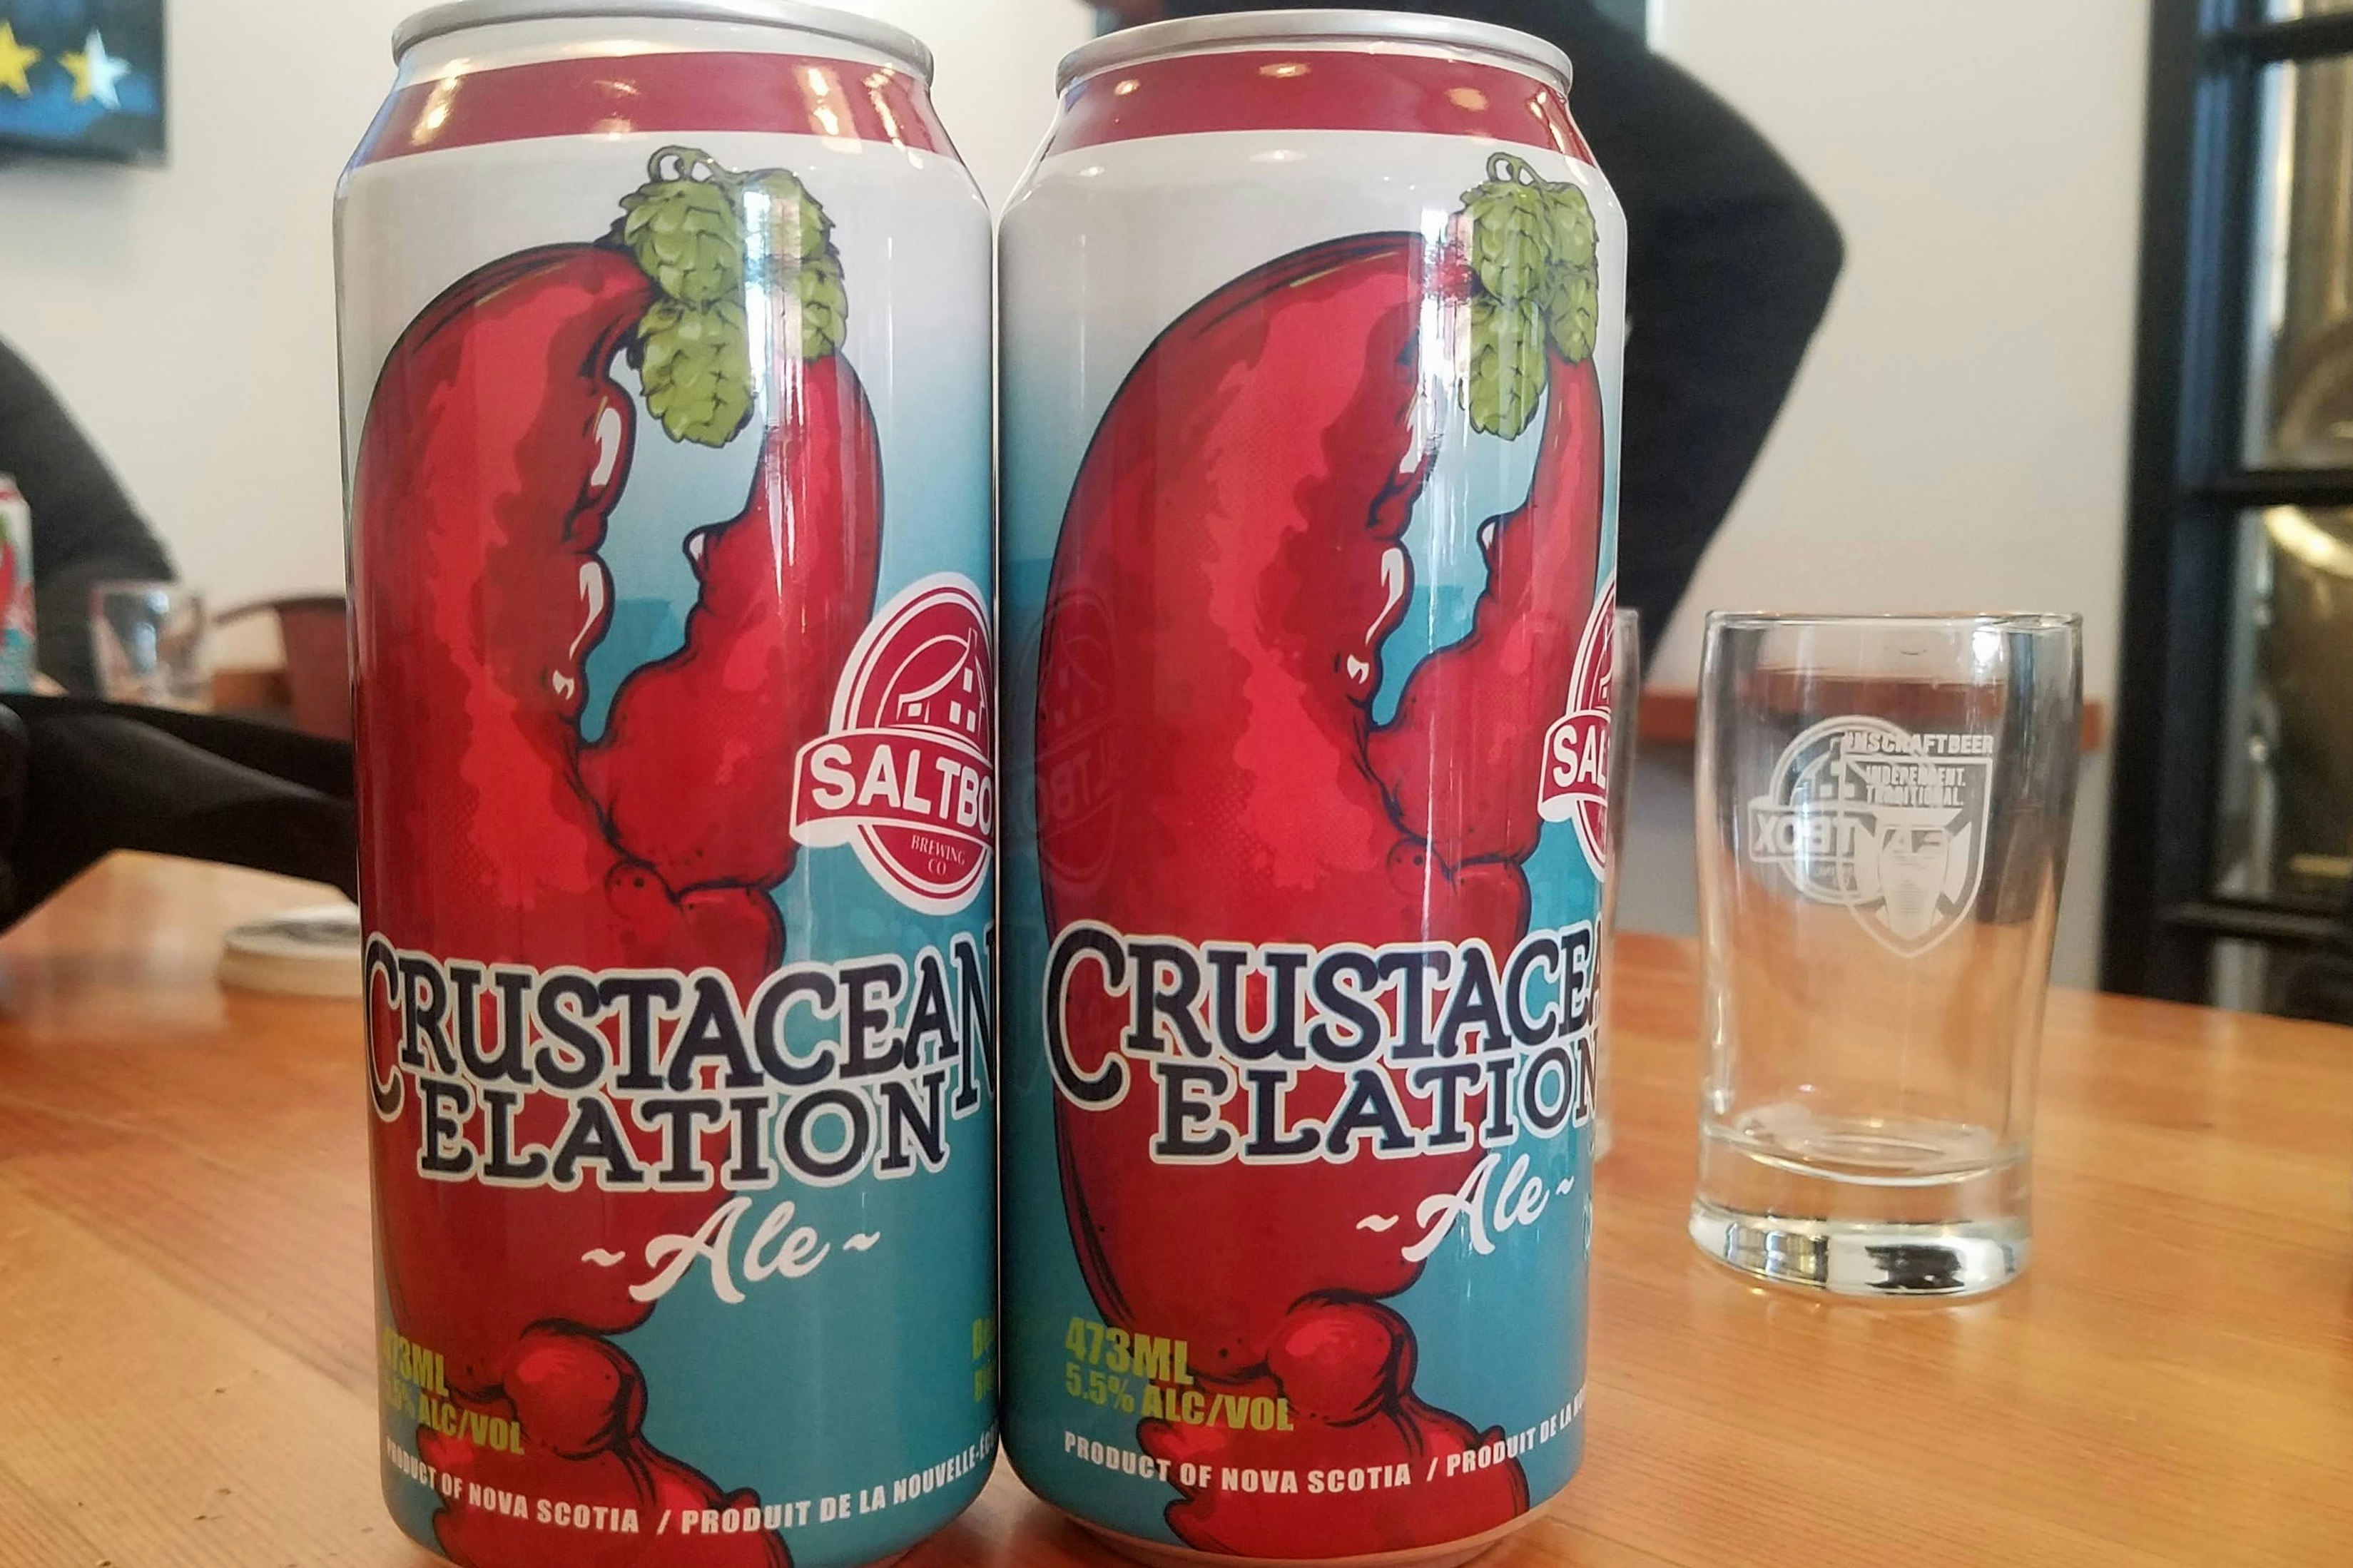 Two large cans of Saltbox Brewery's Crustacean Elation Ale sitting side-by-side on a bar table.